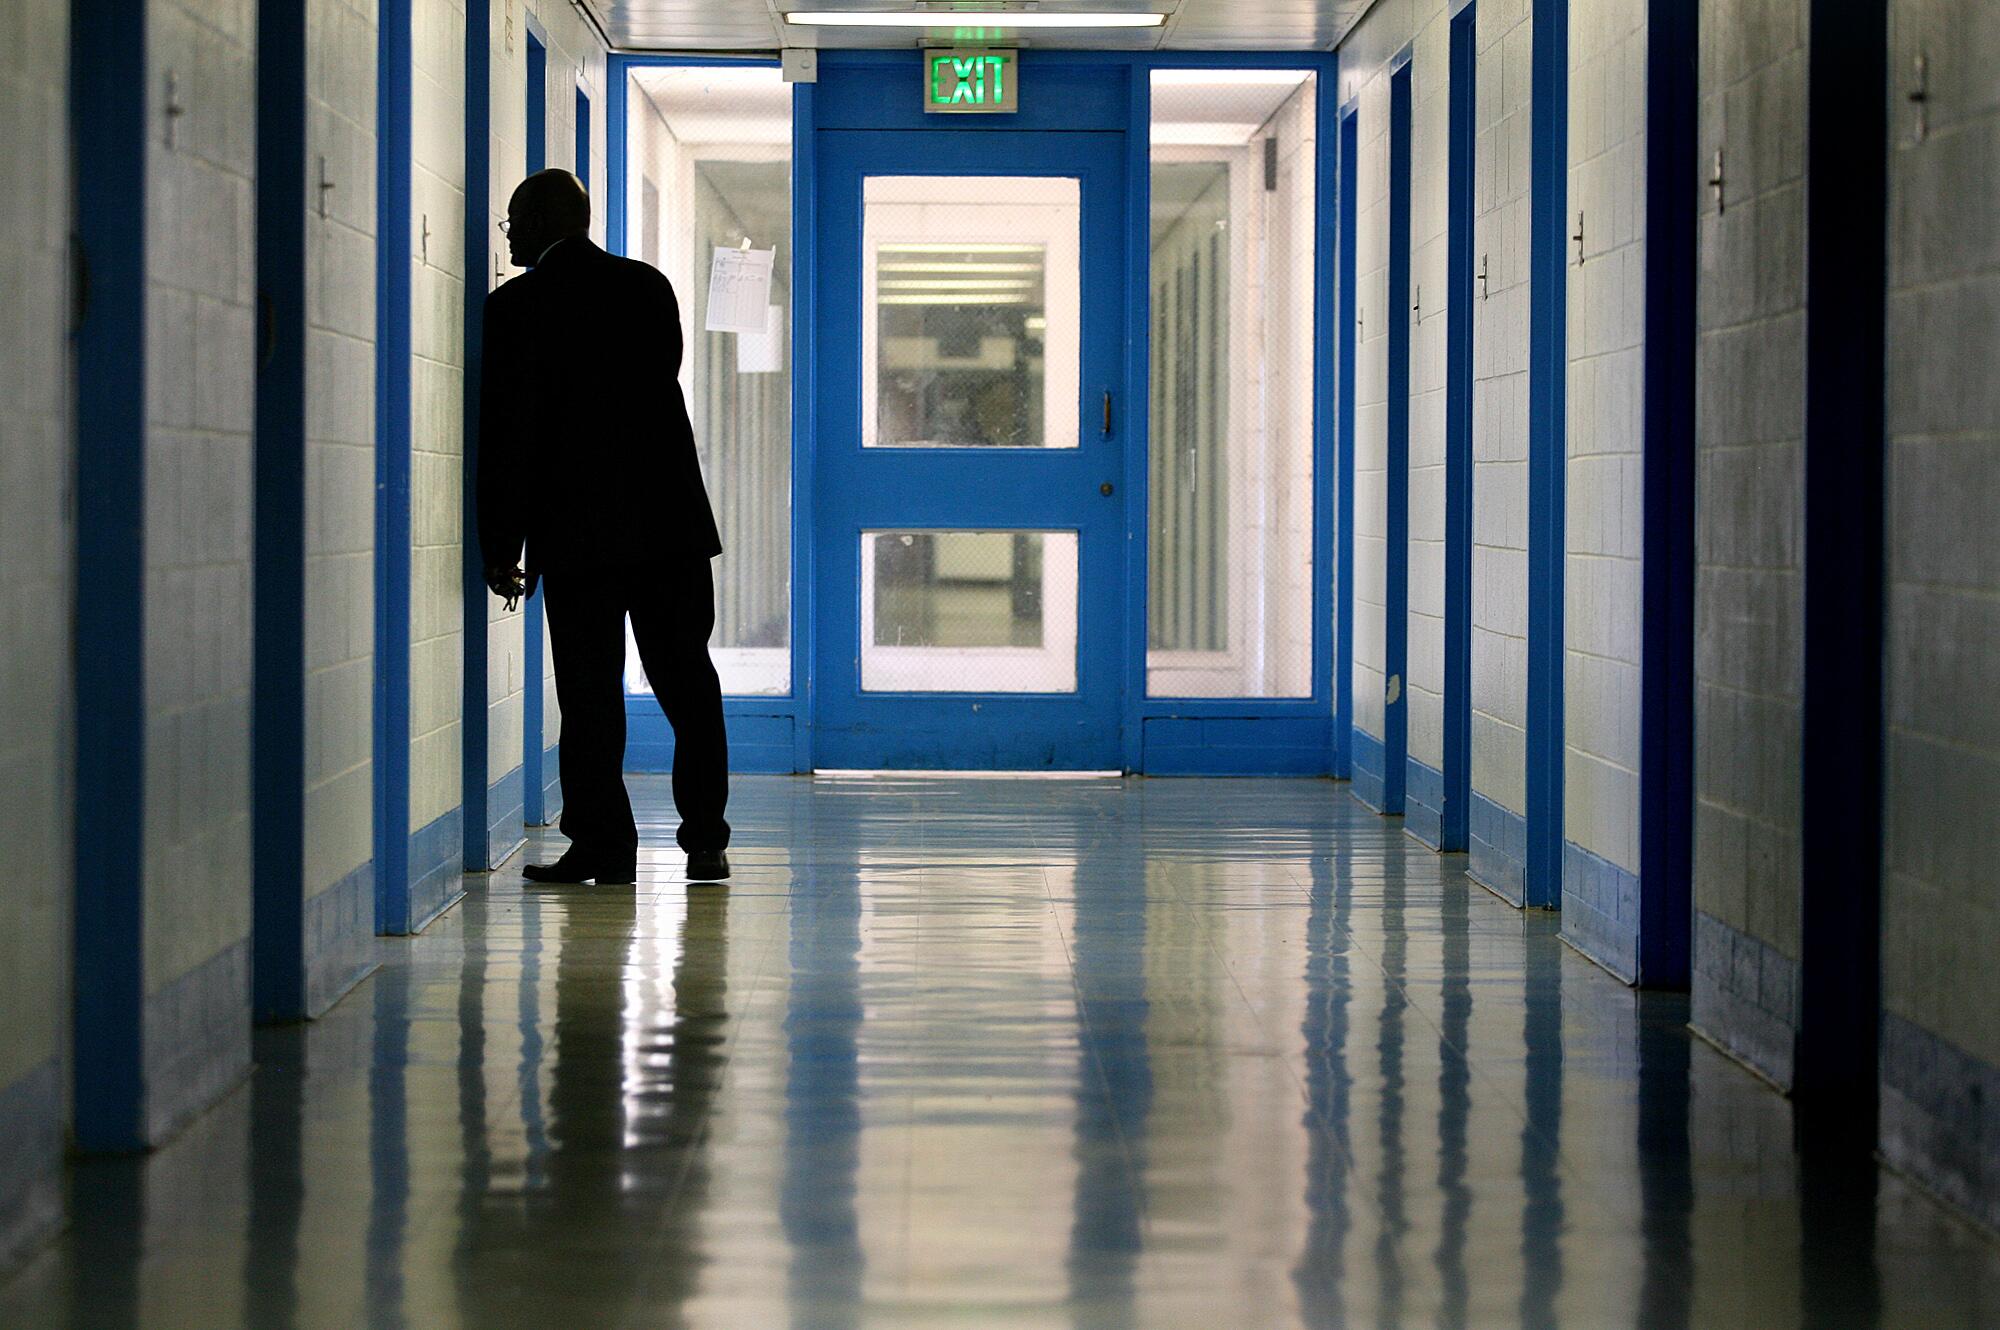 A person in silhouette looking into a room from a hallway